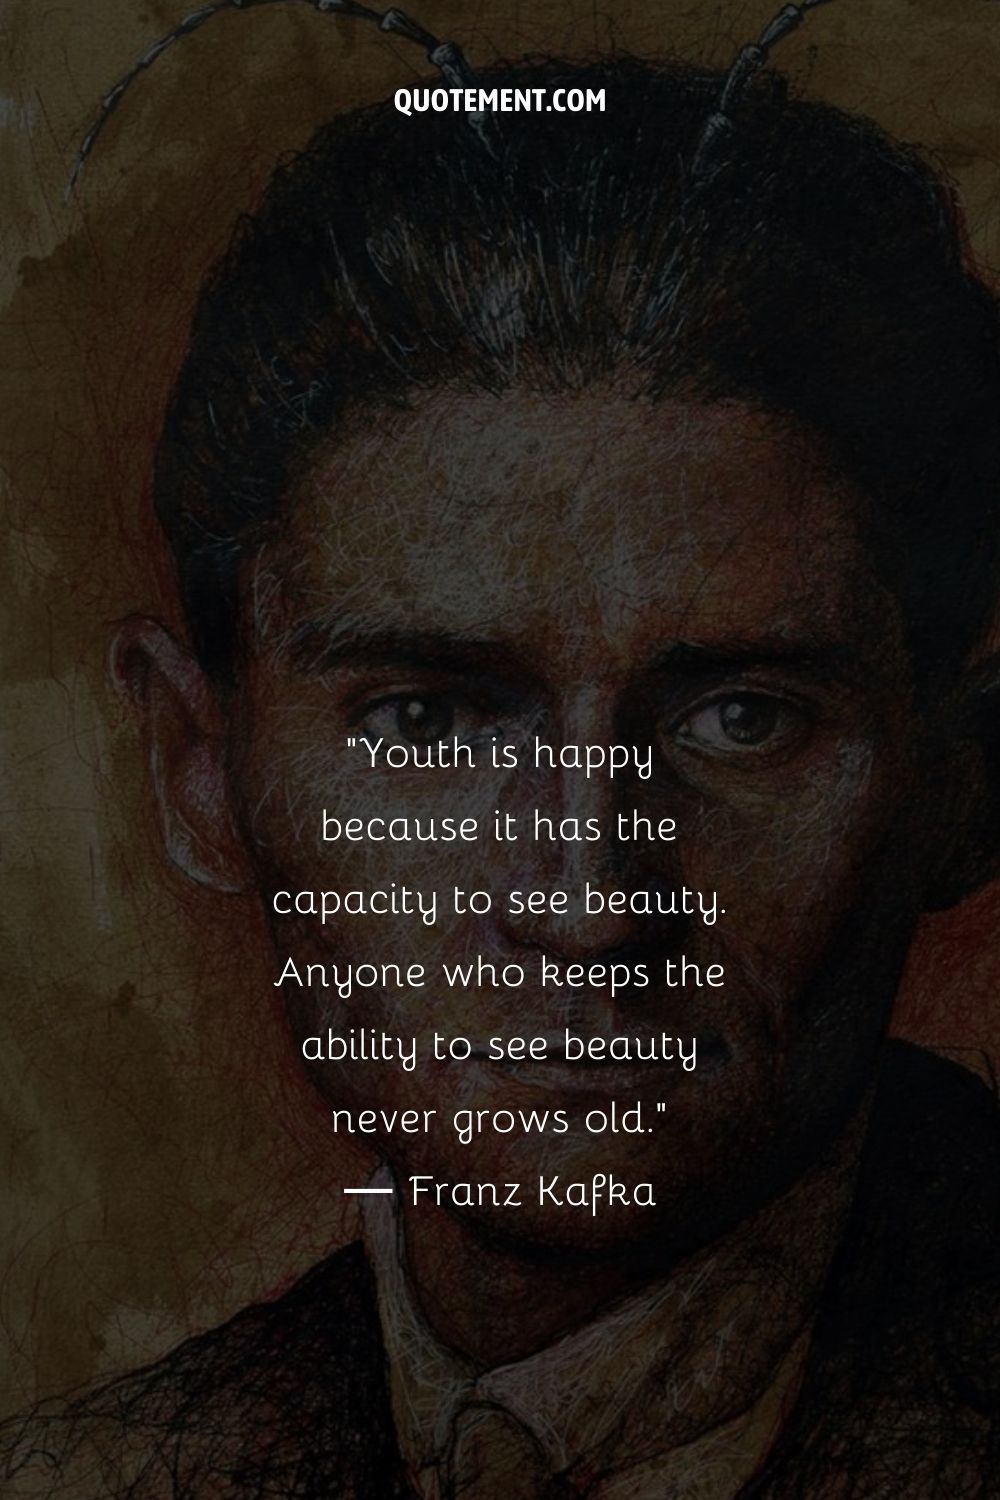 Youth is happy because it has the capacity to see beauty.